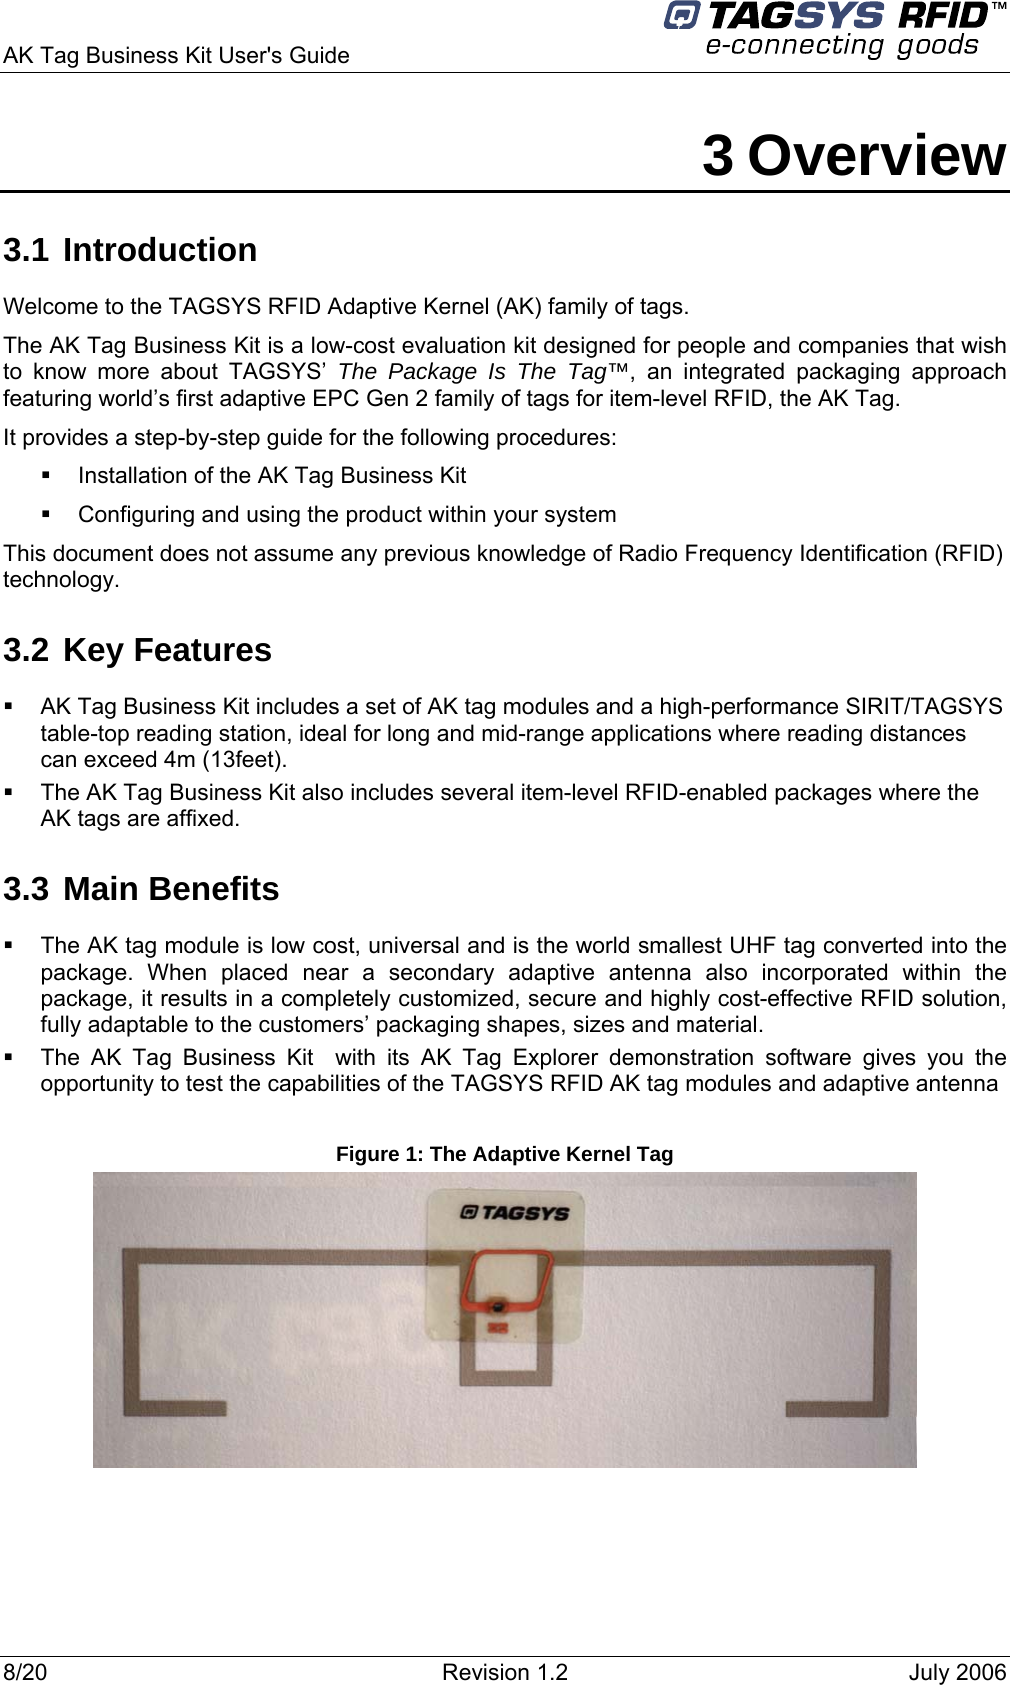  AK Tag Business Kit User&apos;s Guide     3 Overview 3.1 Introduction Welcome to the TAGSYS RFID Adaptive Kernel (AK) family of tags. The AK Tag Business Kit is a low-cost evaluation kit designed for people and companies that wish to know more about TAGSYS’ The Package Is The Tag™, an integrated packaging approach featuring world’s first adaptive EPC Gen 2 family of tags for item-level RFID, the AK Tag. It provides a step-by-step guide for the following procedures:    Installation of the AK Tag Business Kit   Configuring and using the product within your system This document does not assume any previous knowledge of Radio Frequency Identification (RFID) technology.  3.2 Key Features   AK Tag Business Kit includes a set of AK tag modules and a high-performance SIRIT/TAGSYS table-top reading station, ideal for long and mid-range applications where reading distances can exceed 4m (13feet).   The AK Tag Business Kit also includes several item-level RFID-enabled packages where the AK tags are affixed. 3.3 Main Benefits   The AK tag module is low cost, universal and is the world smallest UHF tag converted into the package. When placed near a secondary adaptive antenna also incorporated within the package, it results in a completely customized, secure and highly cost-effective RFID solution, fully adaptable to the customers’ packaging shapes, sizes and material.    The AK Tag Business Kit  with its AK Tag Explorer demonstration software gives you the opportunity to test the capabilities of the TAGSYS RFID AK tag modules and adaptive antenna  Figure 1: The Adaptive Kernel Tag  8/20  Revision 1.2  July 2006 